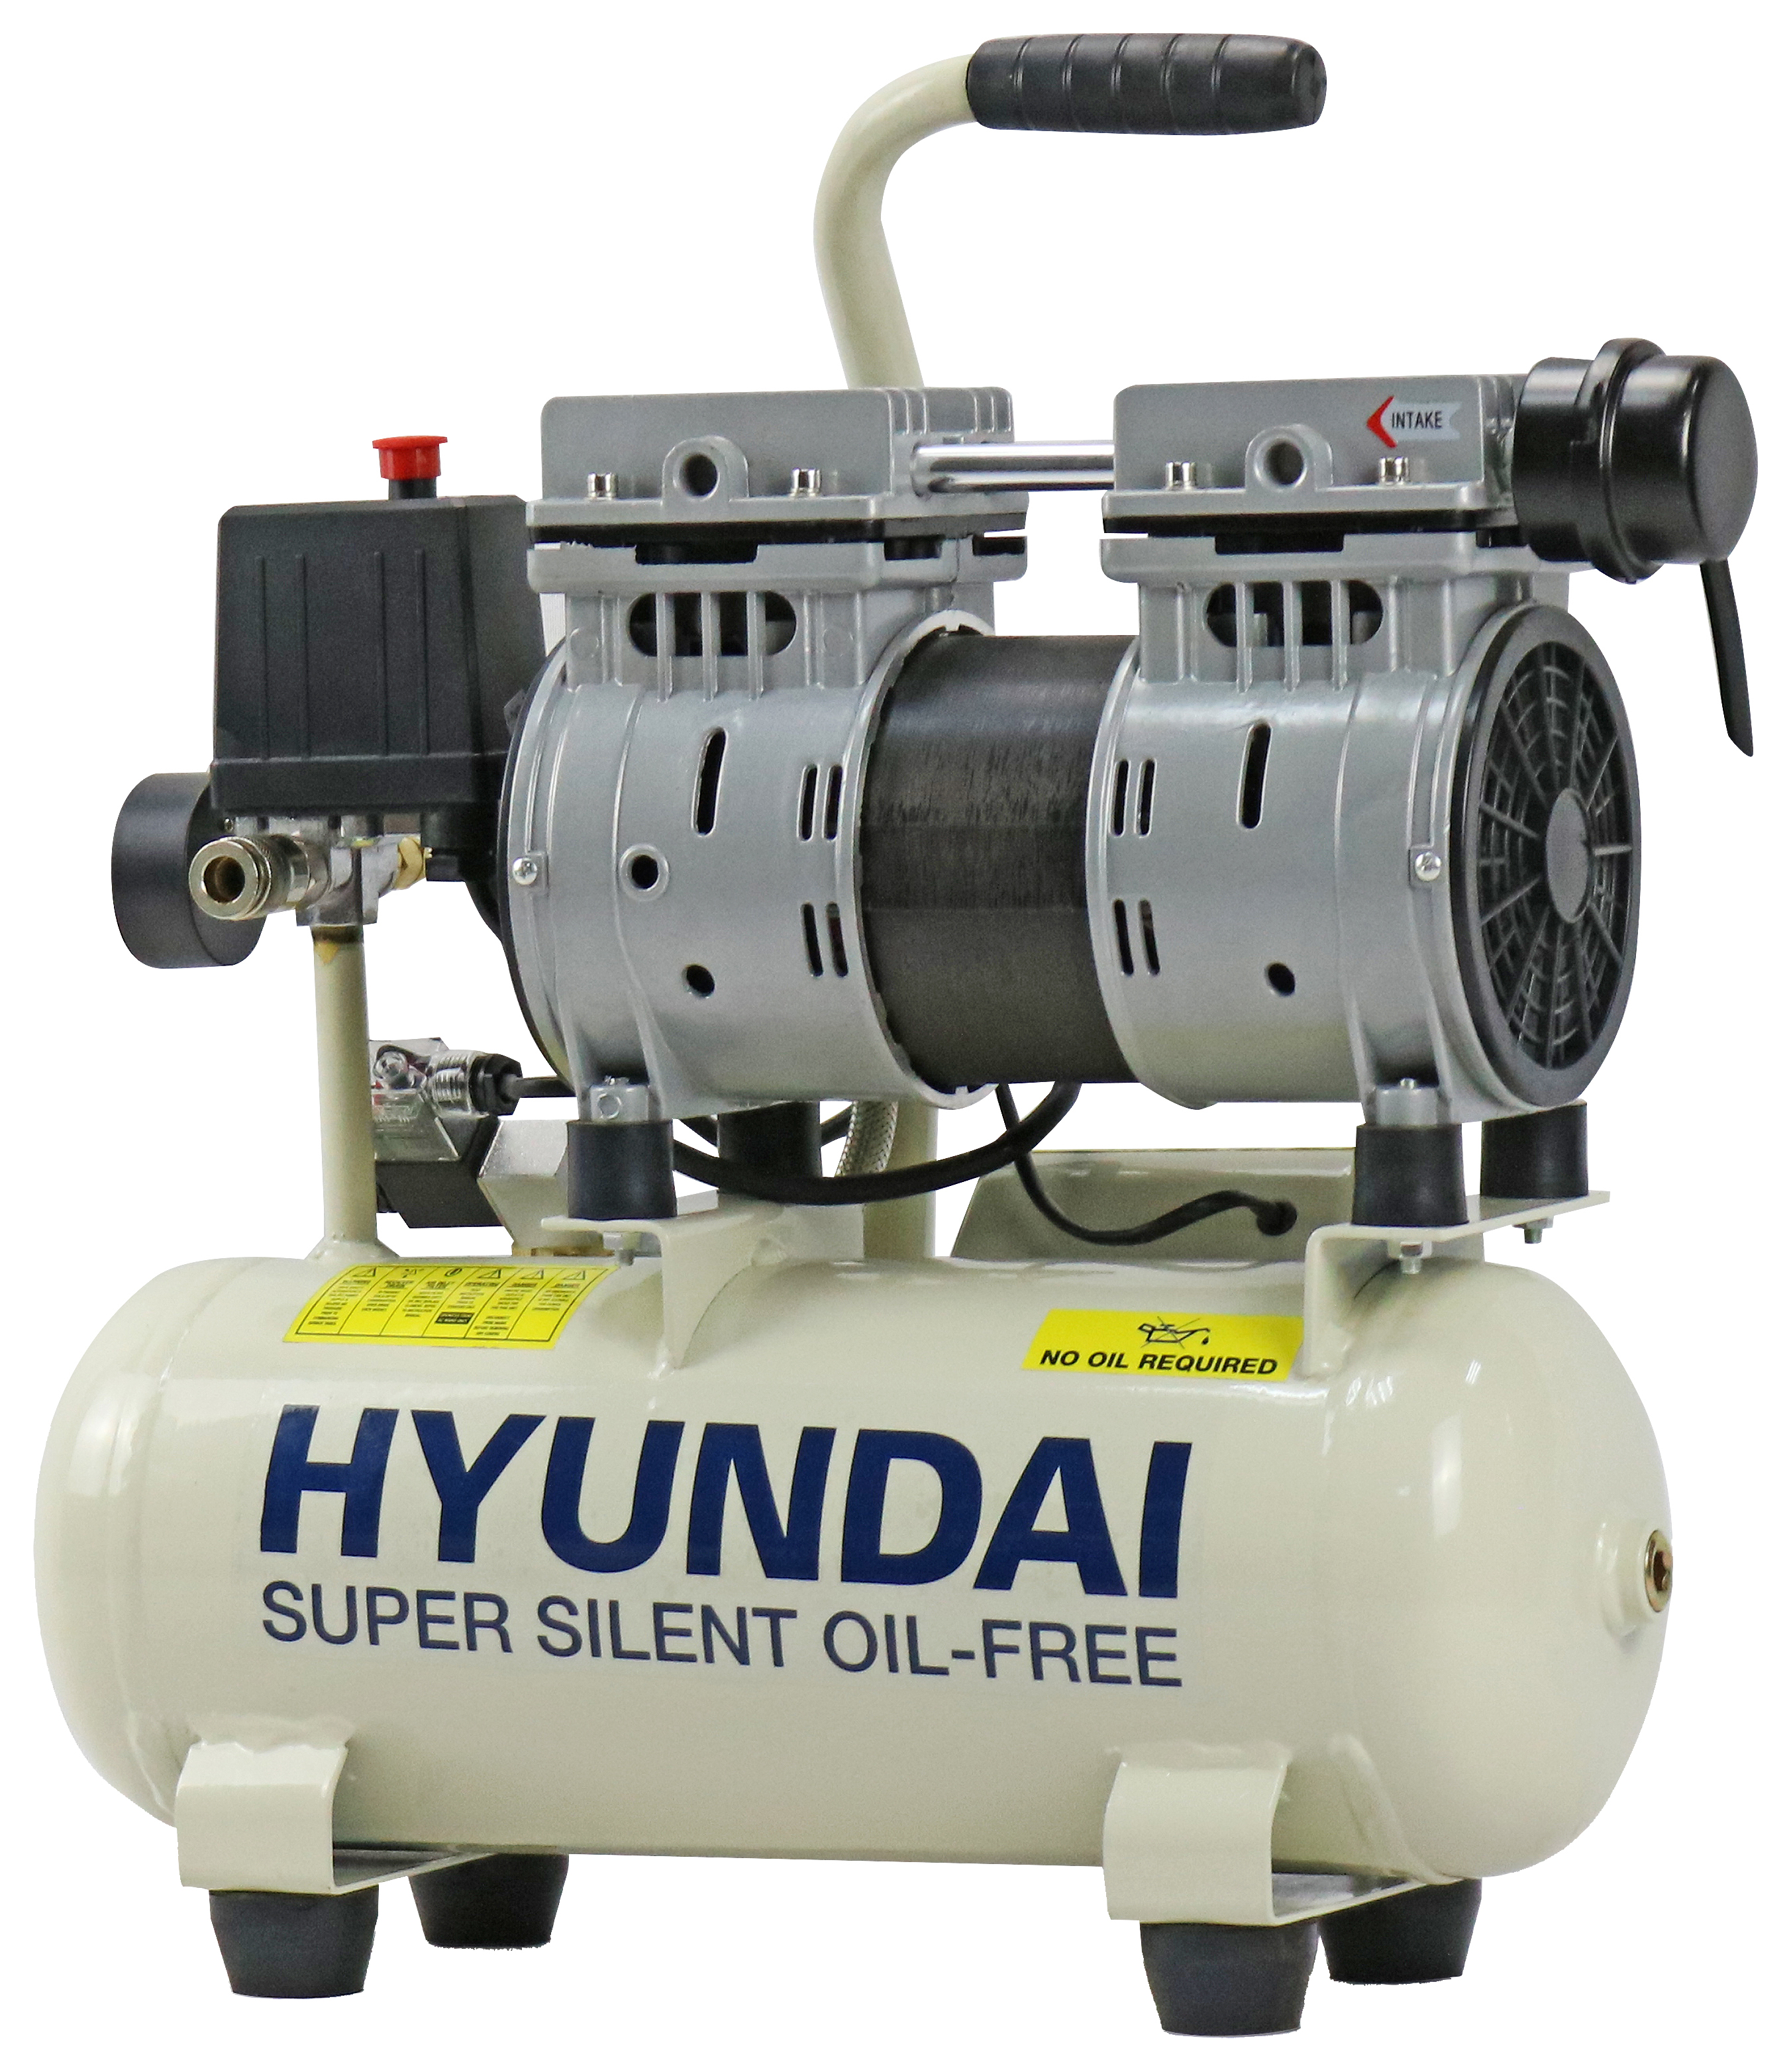 Image of Hyundai HY5508 8L OIL-FREE Low Noise Air Compressor - 550W